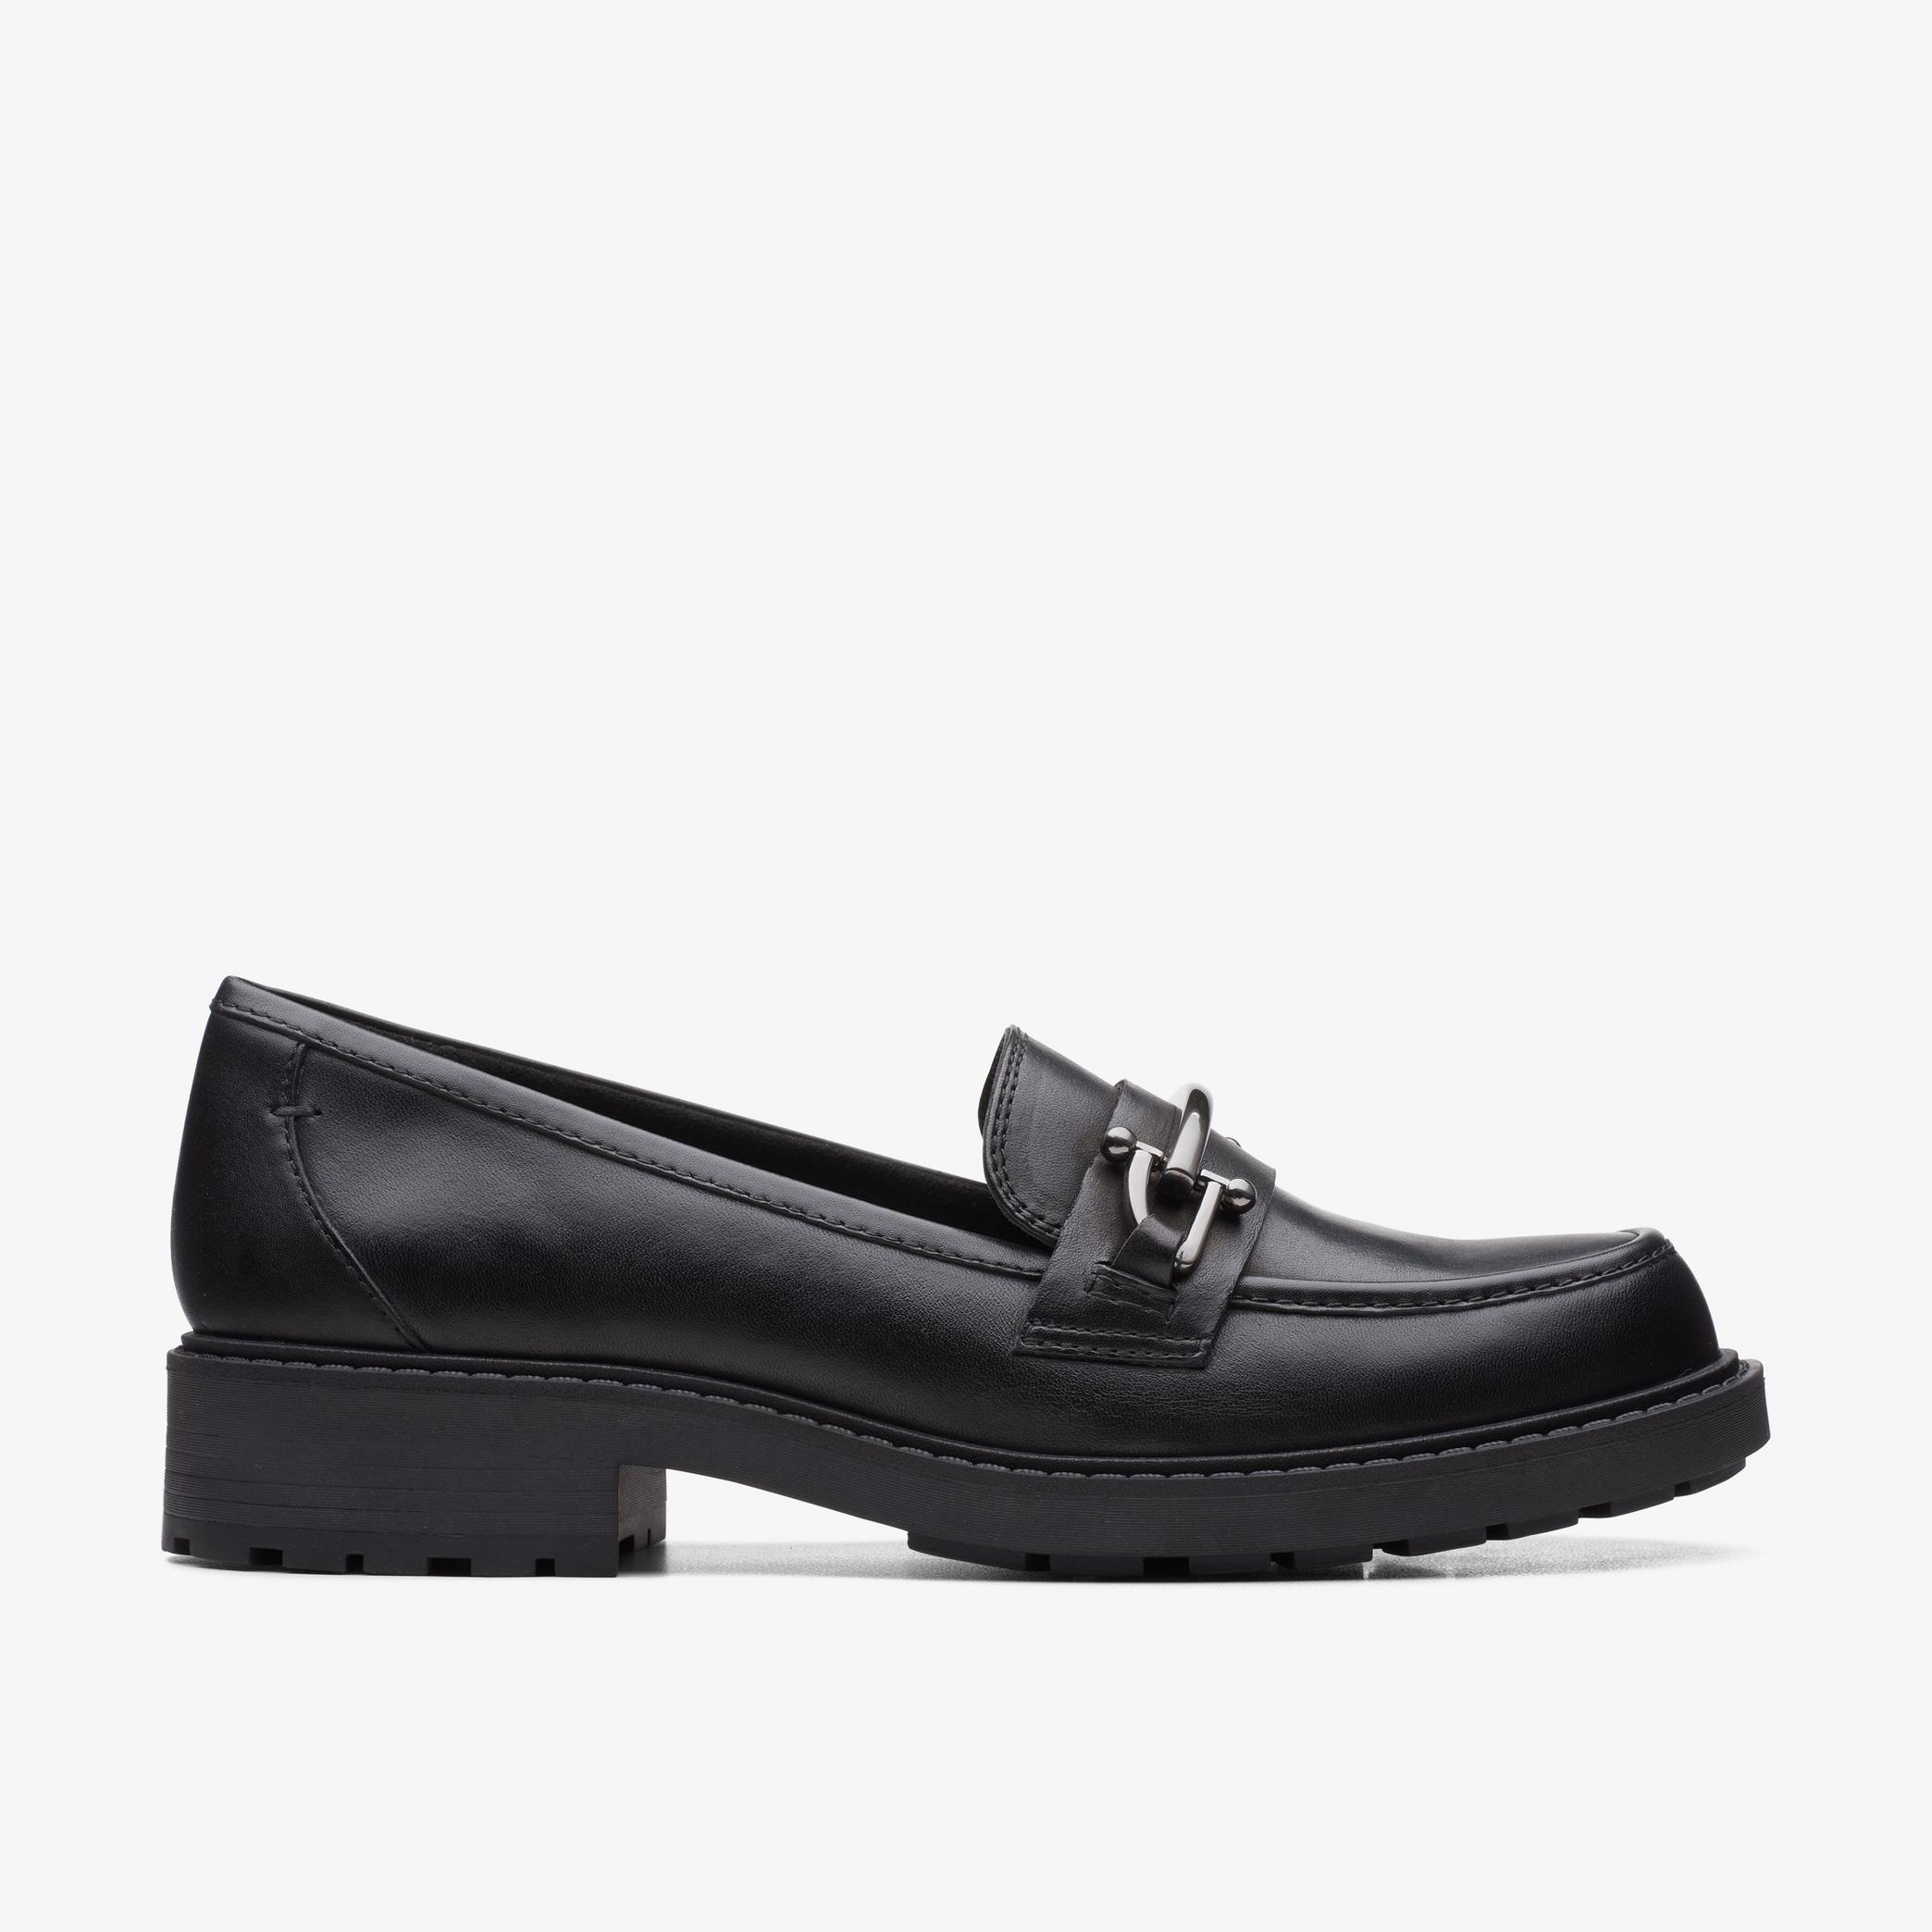 Orinoco2 Edge Black Leather Loafers, view 1 of 6